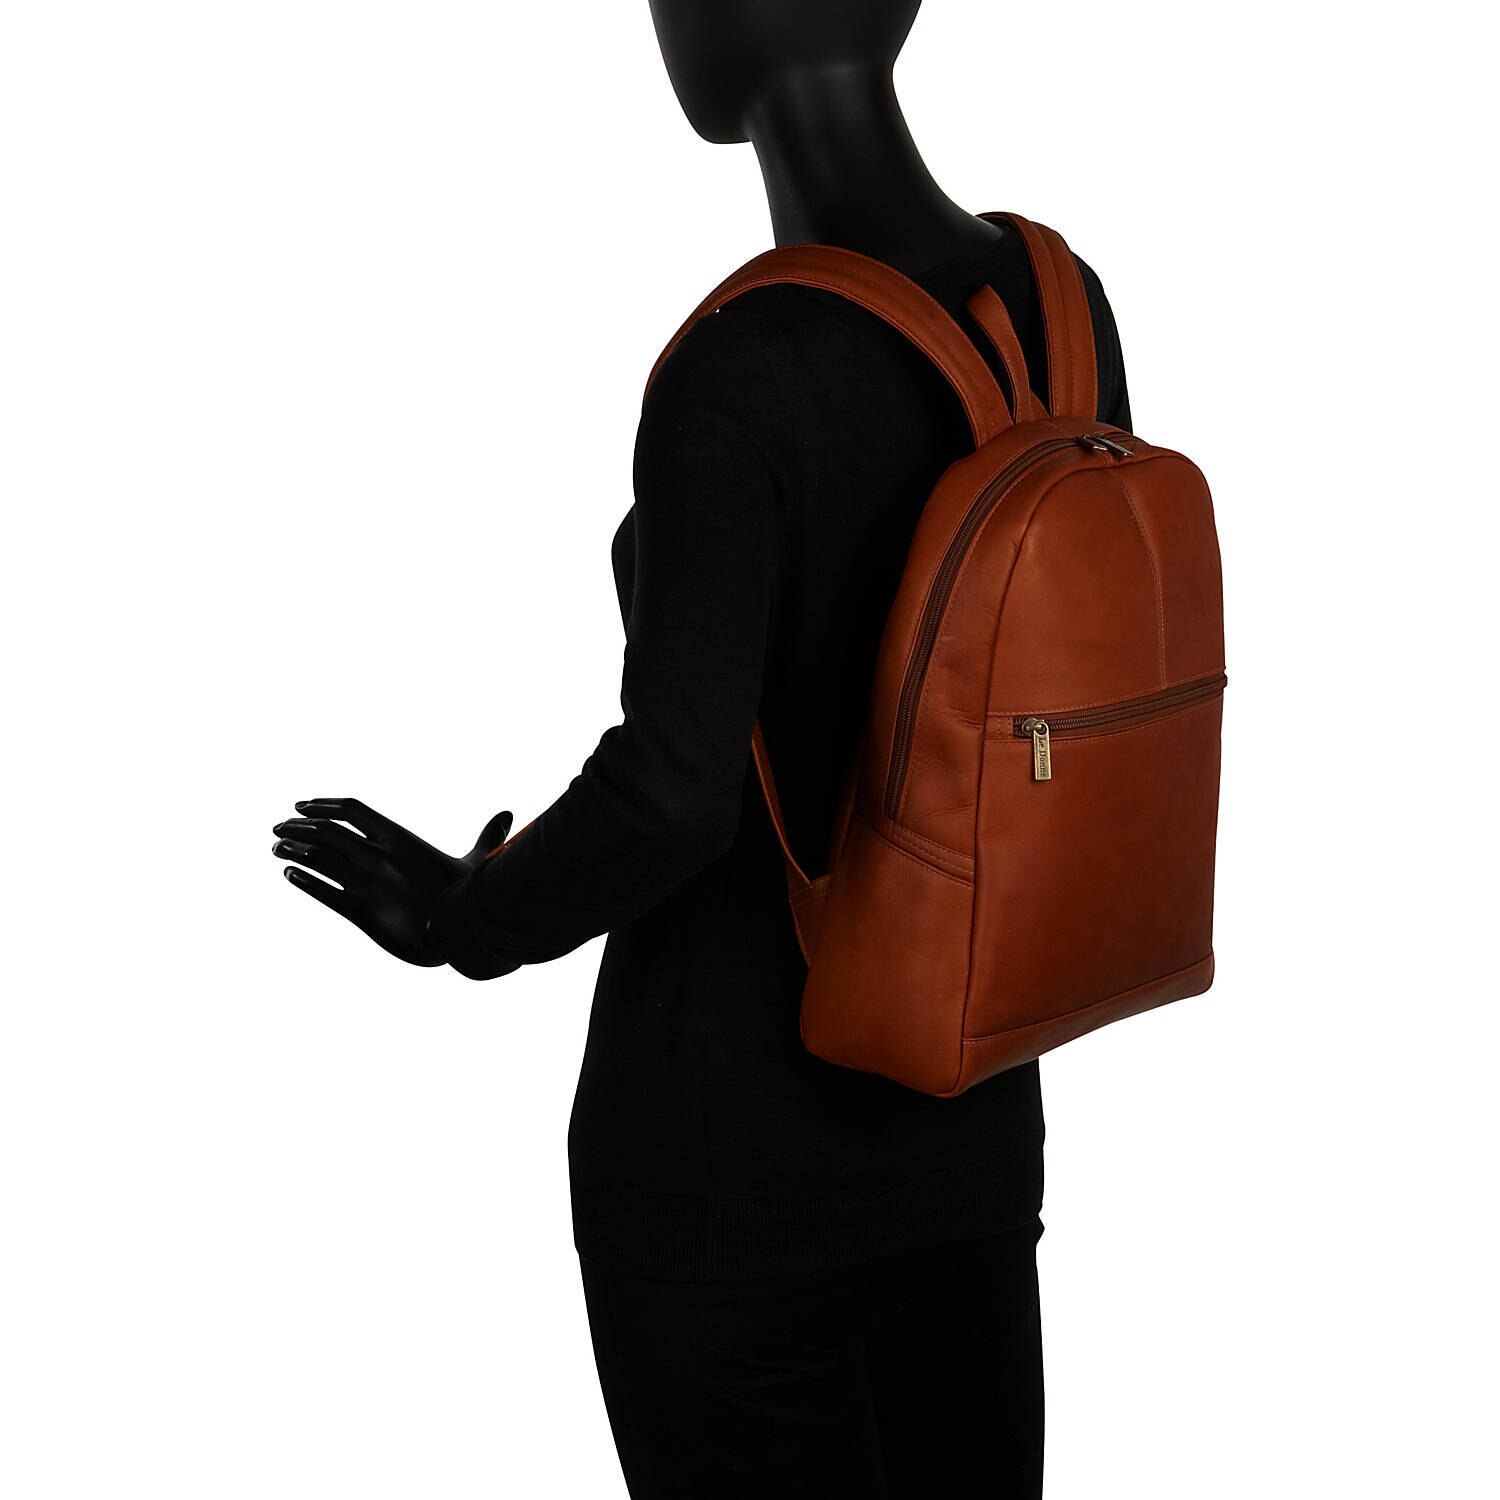 Le Donne Leather Women's Boutique Backpack LD-9944 - image 4 of 4